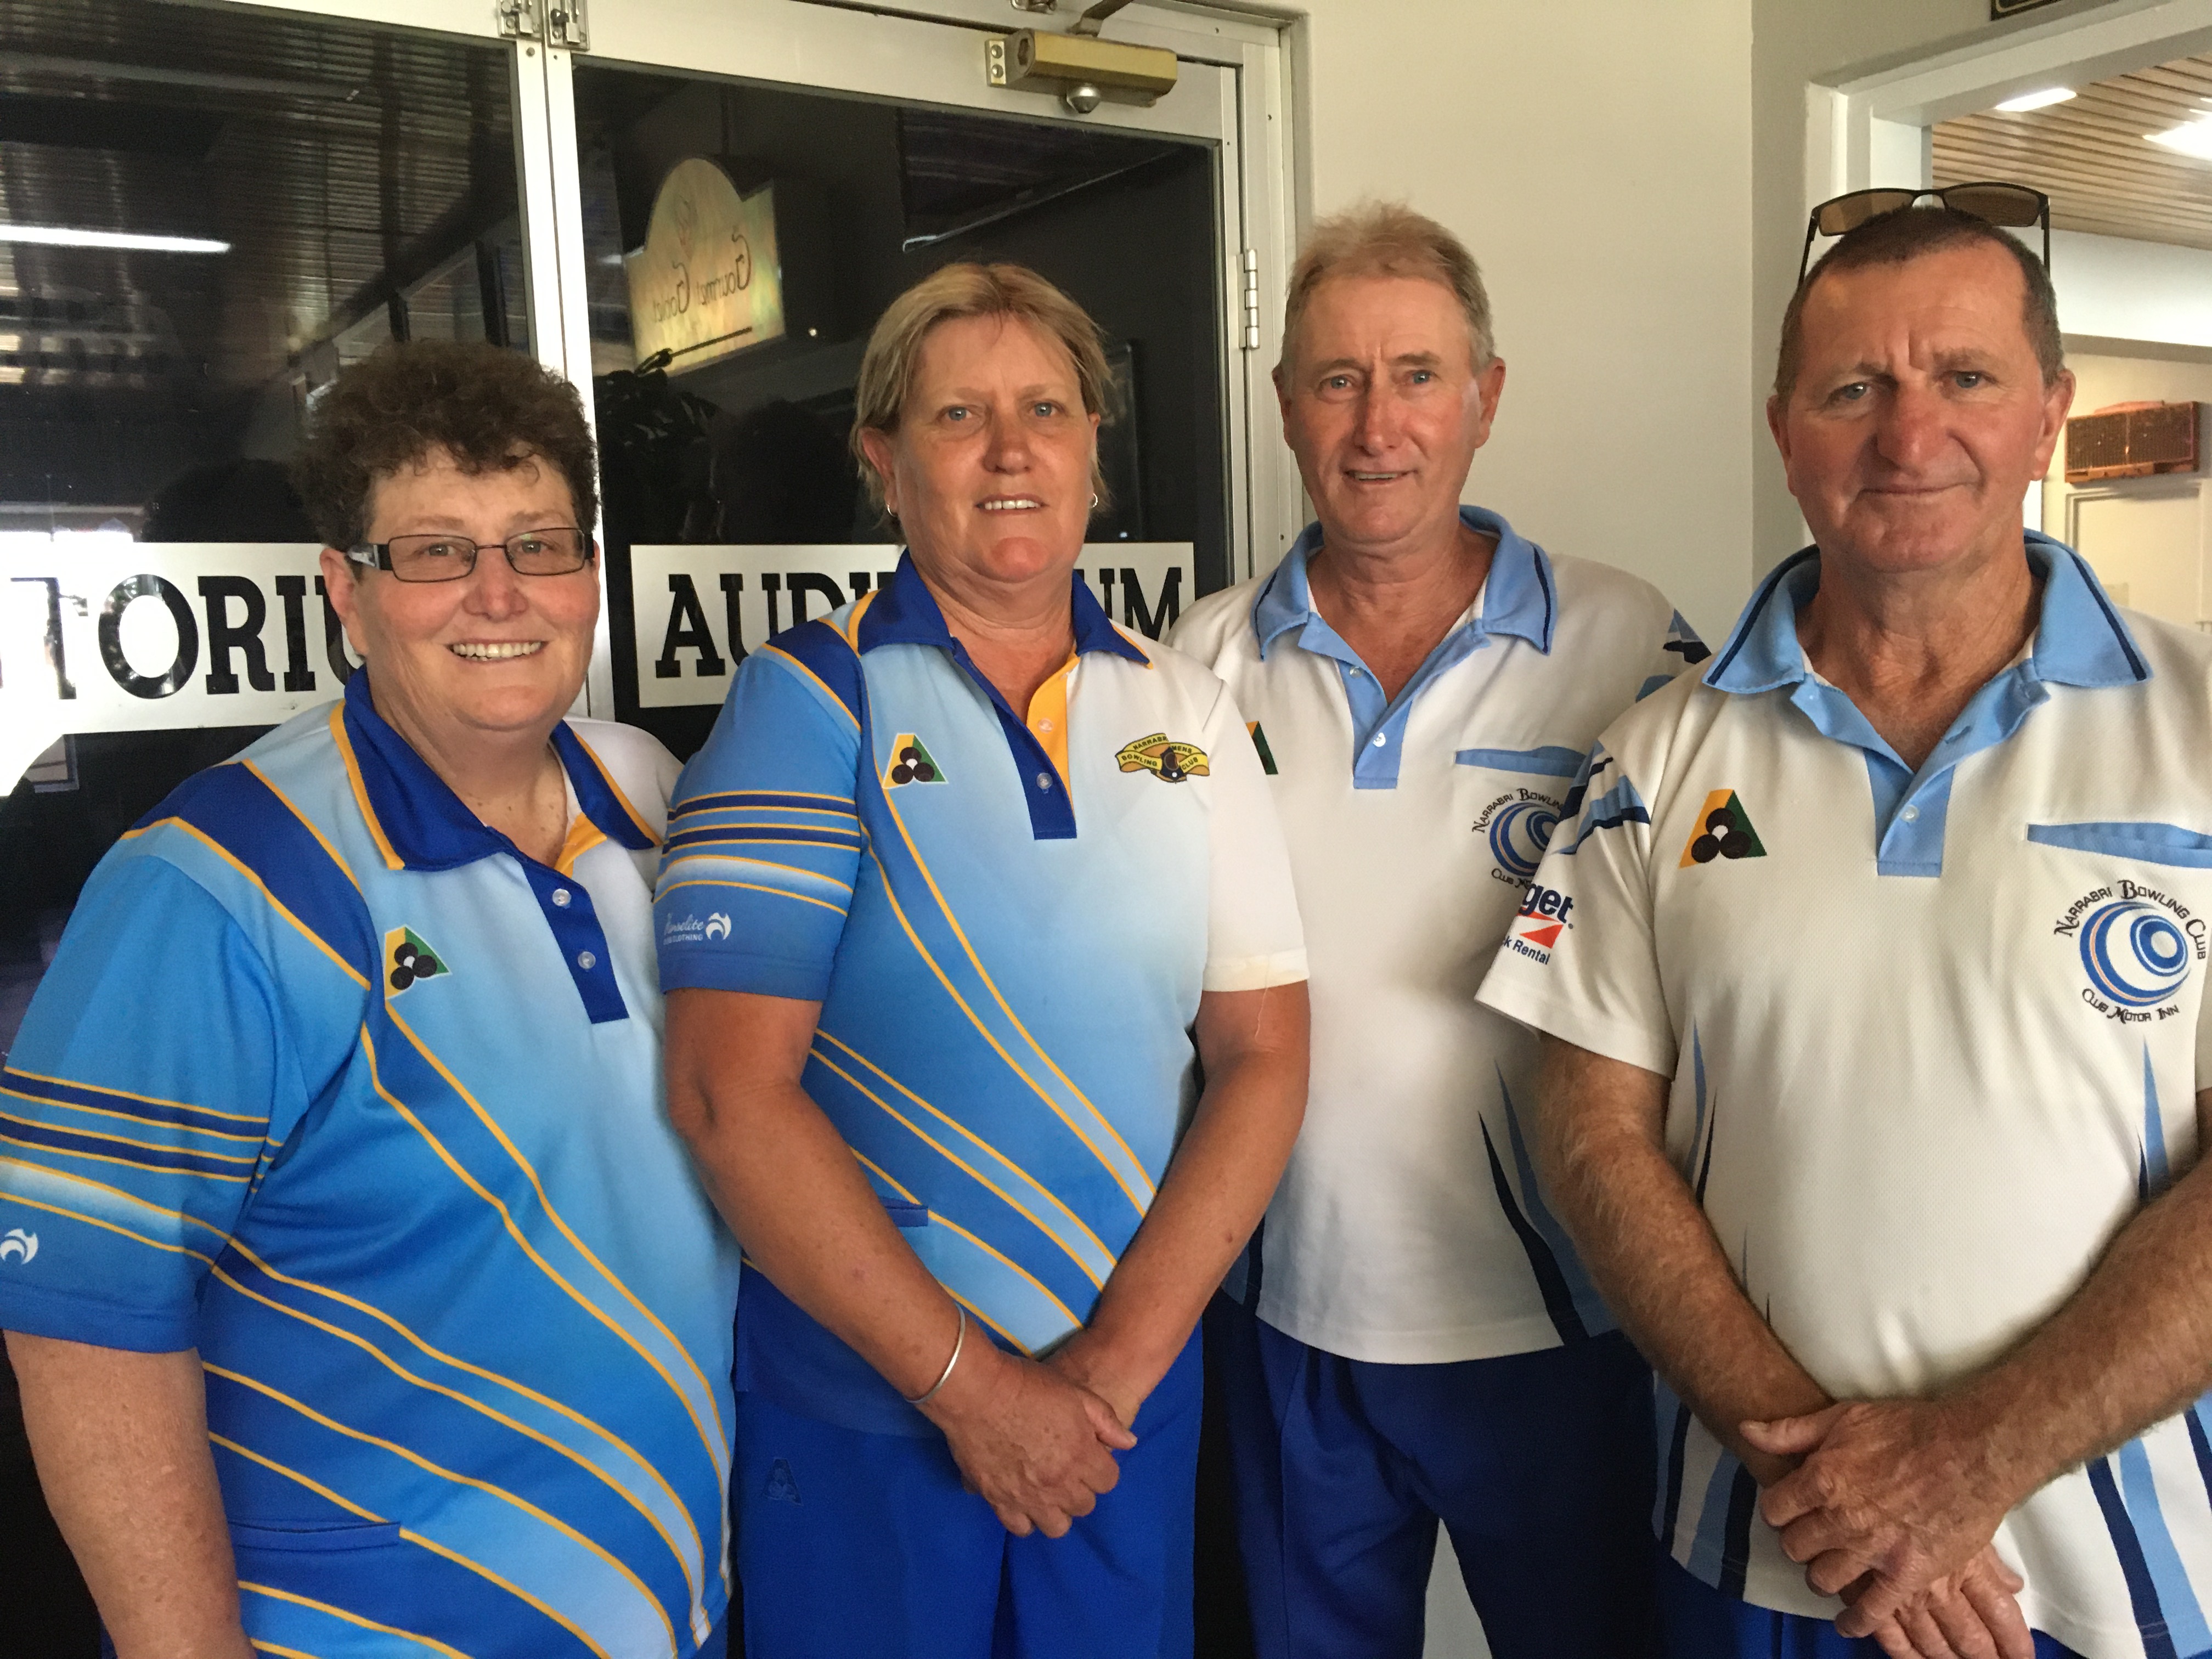 Mixed Fours final wraps up a busy year for the local bowlers